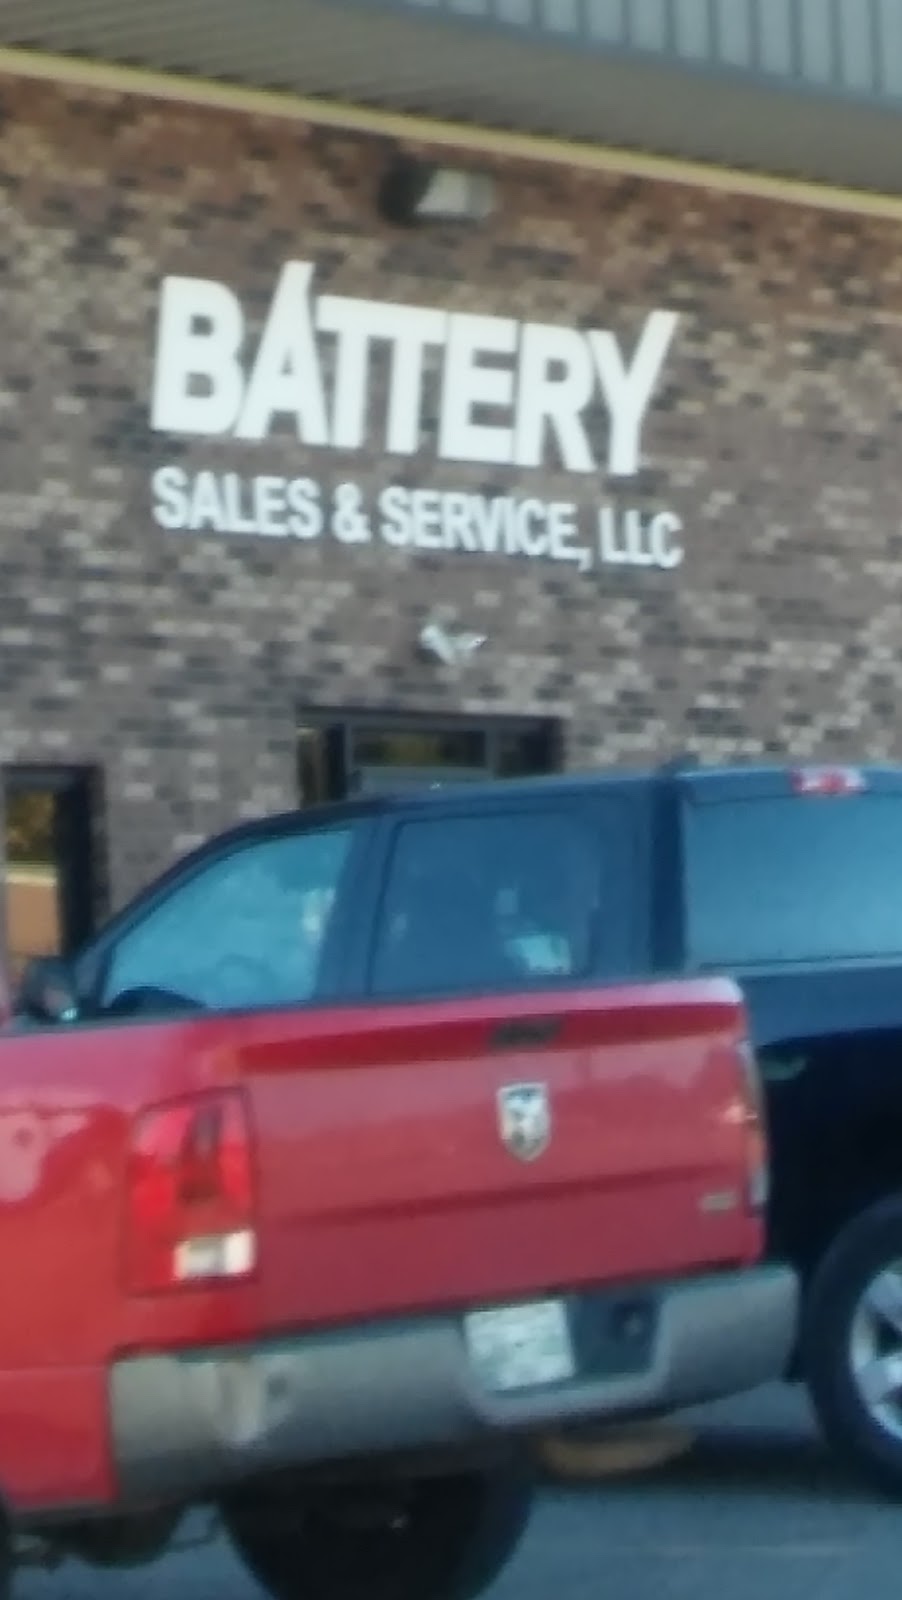 Battery Sales & Service | 3641 Knight Arnold Rd, Memphis, TN 38118 | Phone: (901) 396-3200